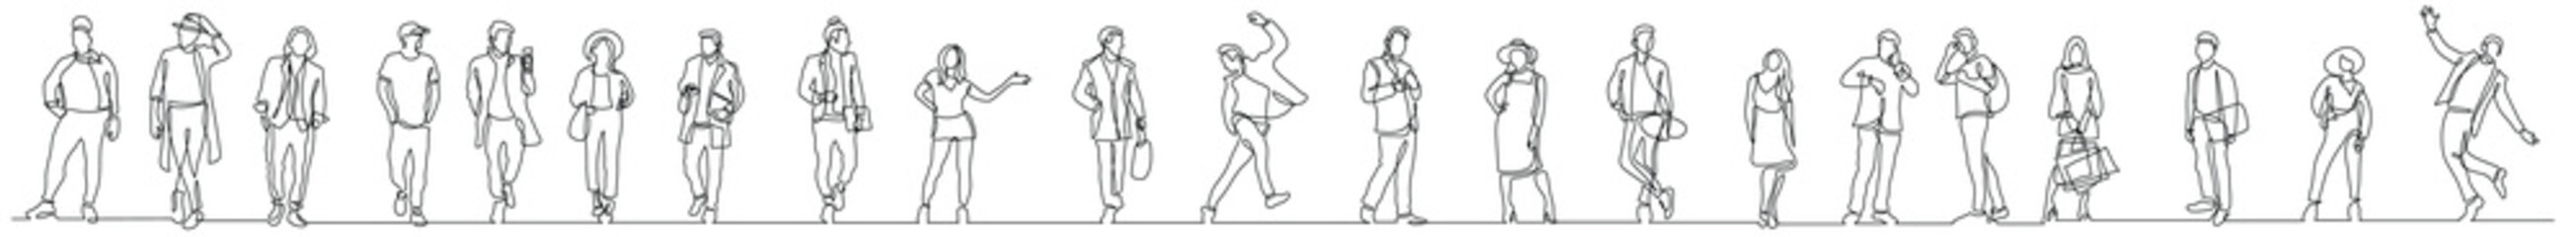 continuous line drawing of group of happy positive diverse people standing in line - PNG image with transparent background